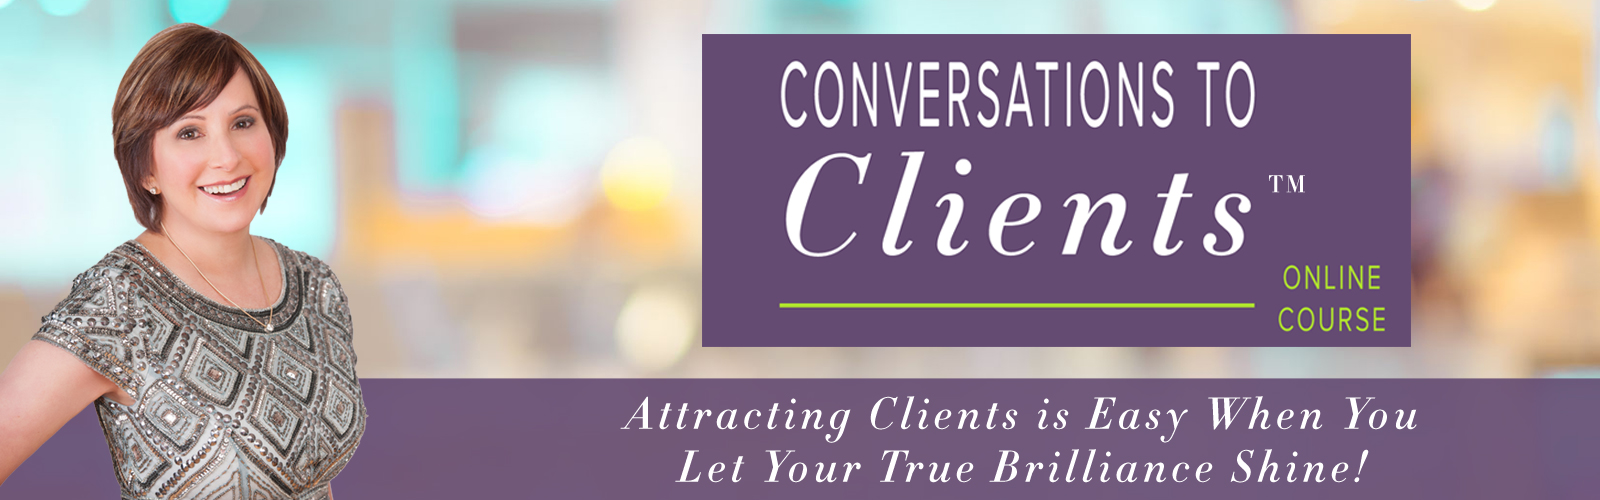 Kate Beeders - Conversations to Clients™ Online Course